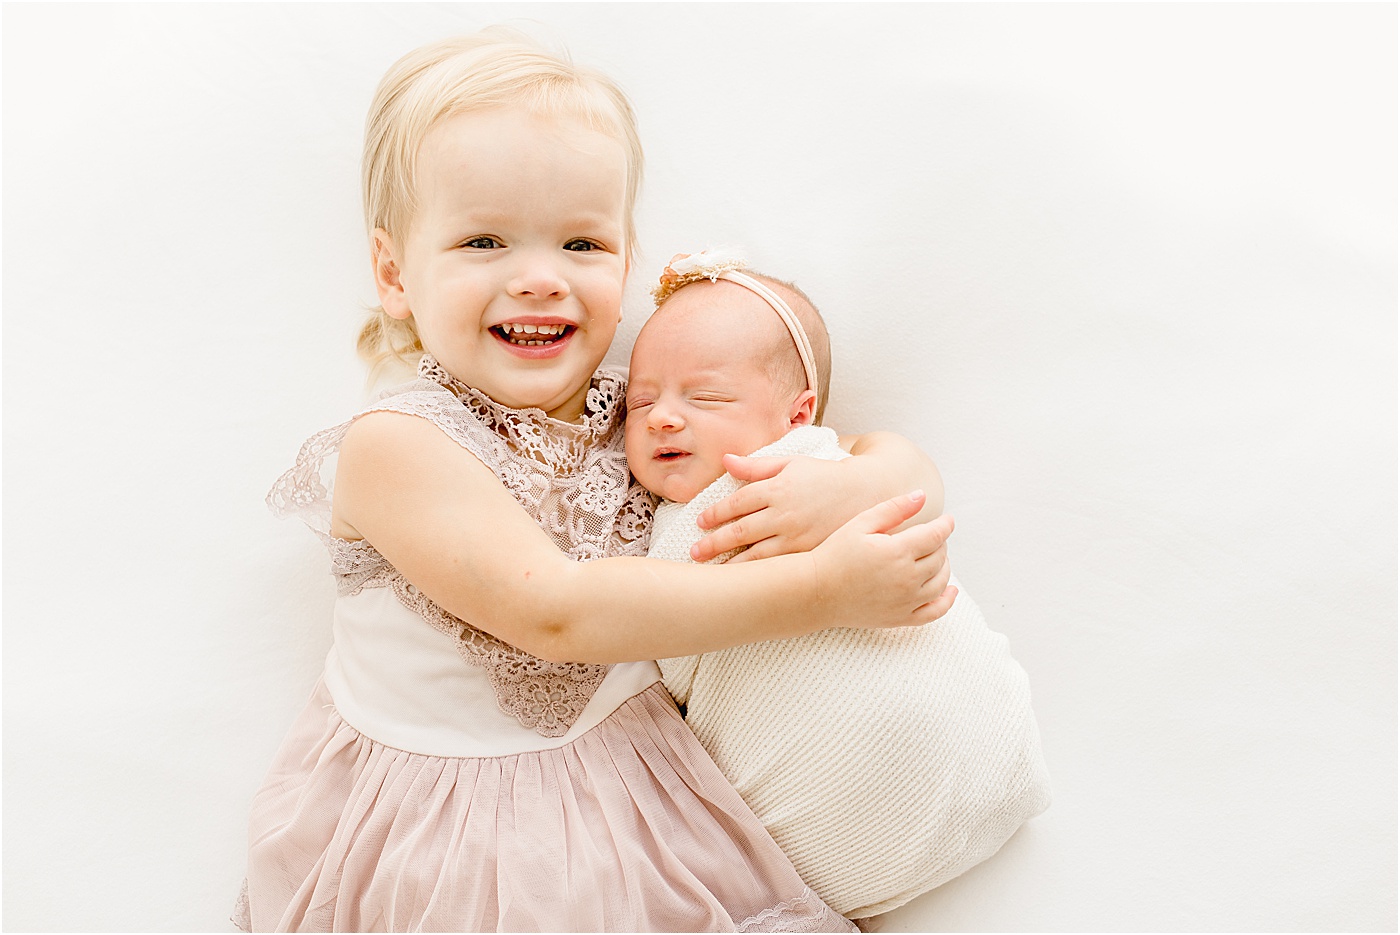 Sweet sibling moment as big sister holds baby sister during newborn photography session in Austin.